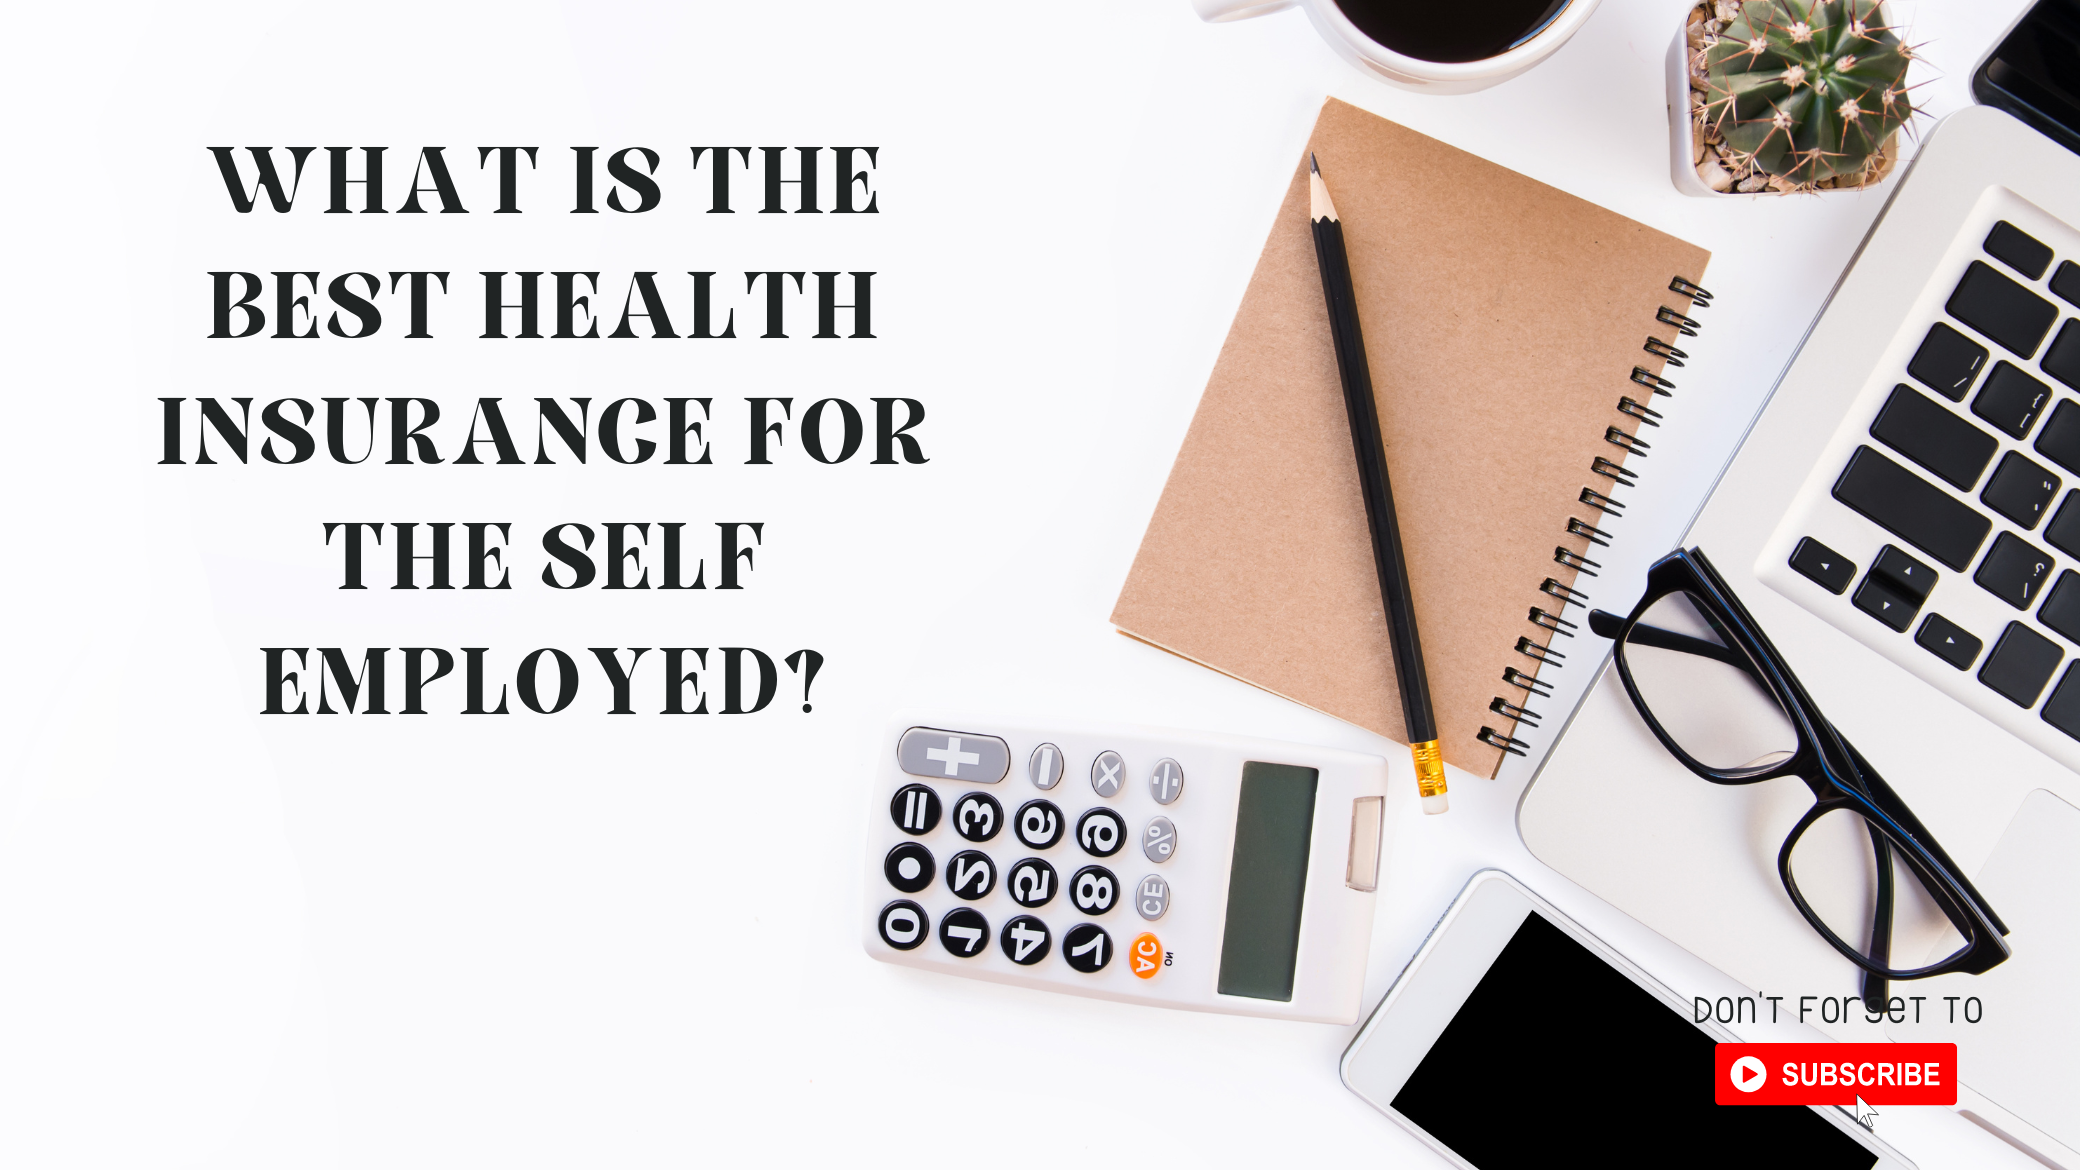 What Is The Best Health Insurance For The Self Employed